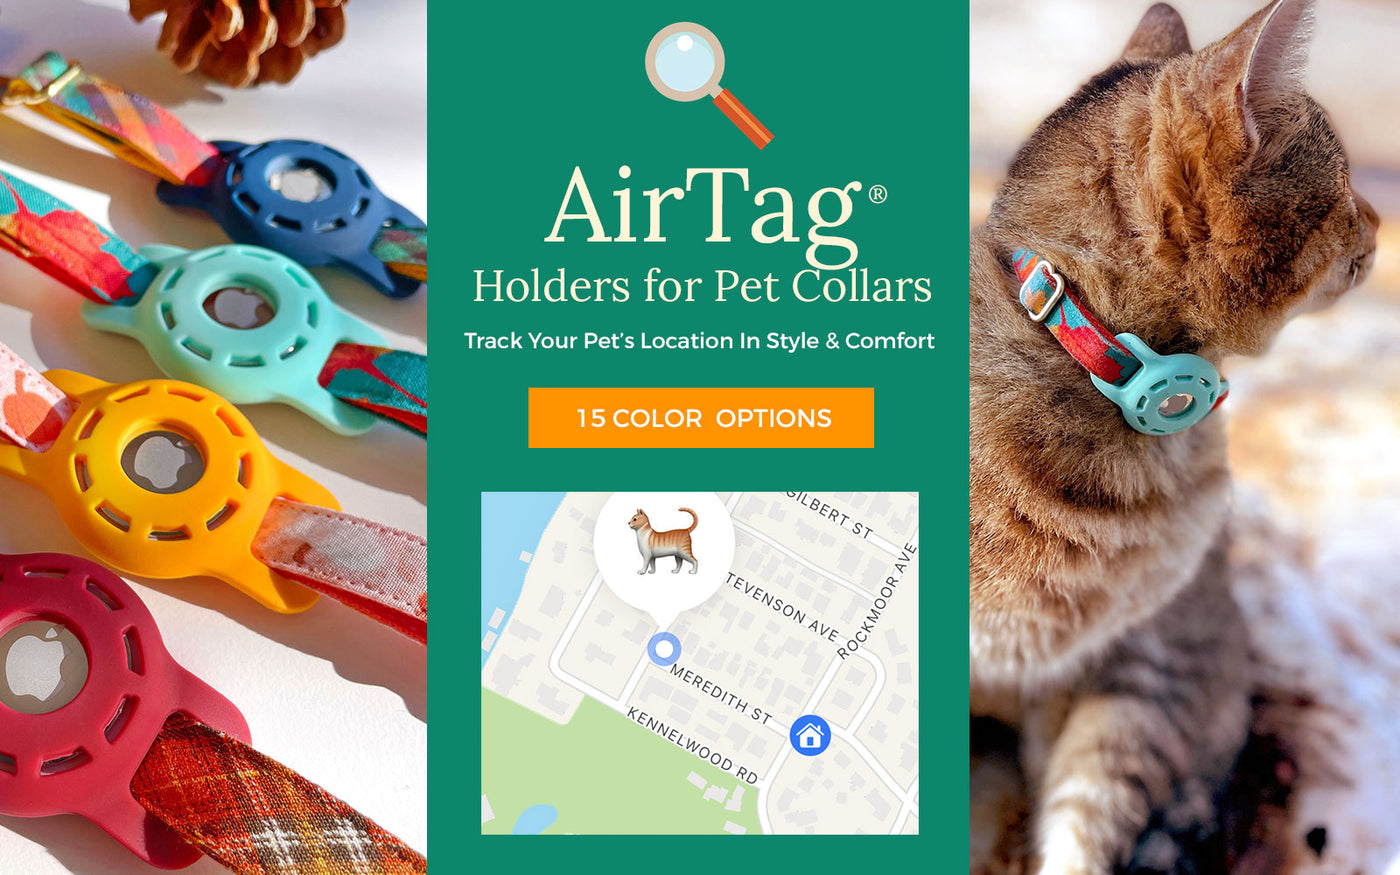 Stylish & Unique Cat Collars + Cat Bow Ties and Personalized ID Tags